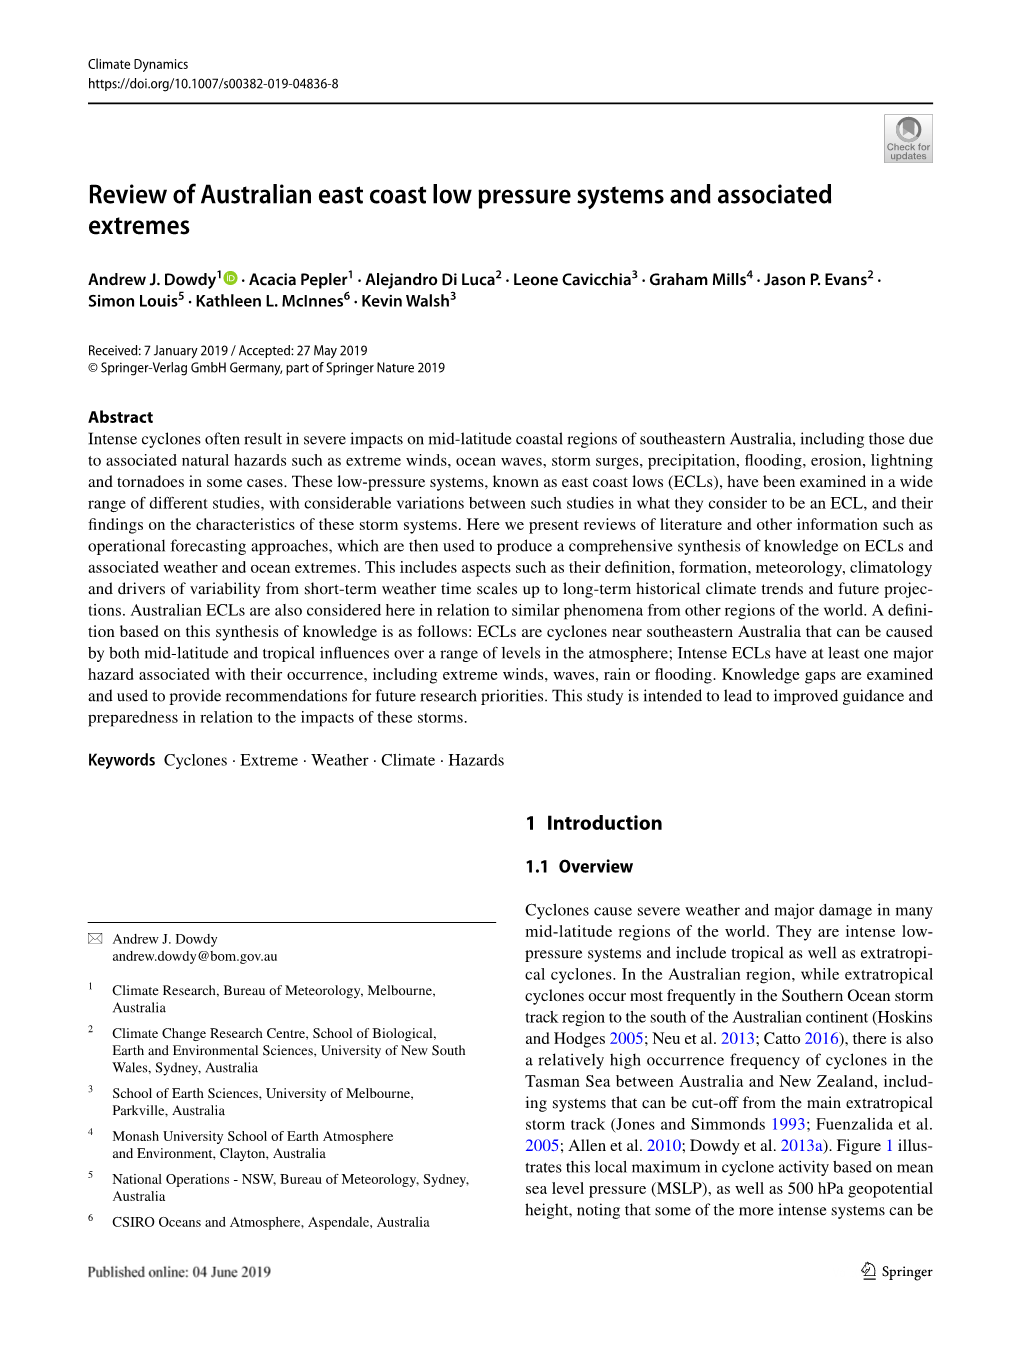 Review of Australian East Coast Low Pressure Systems and Associated Extremes